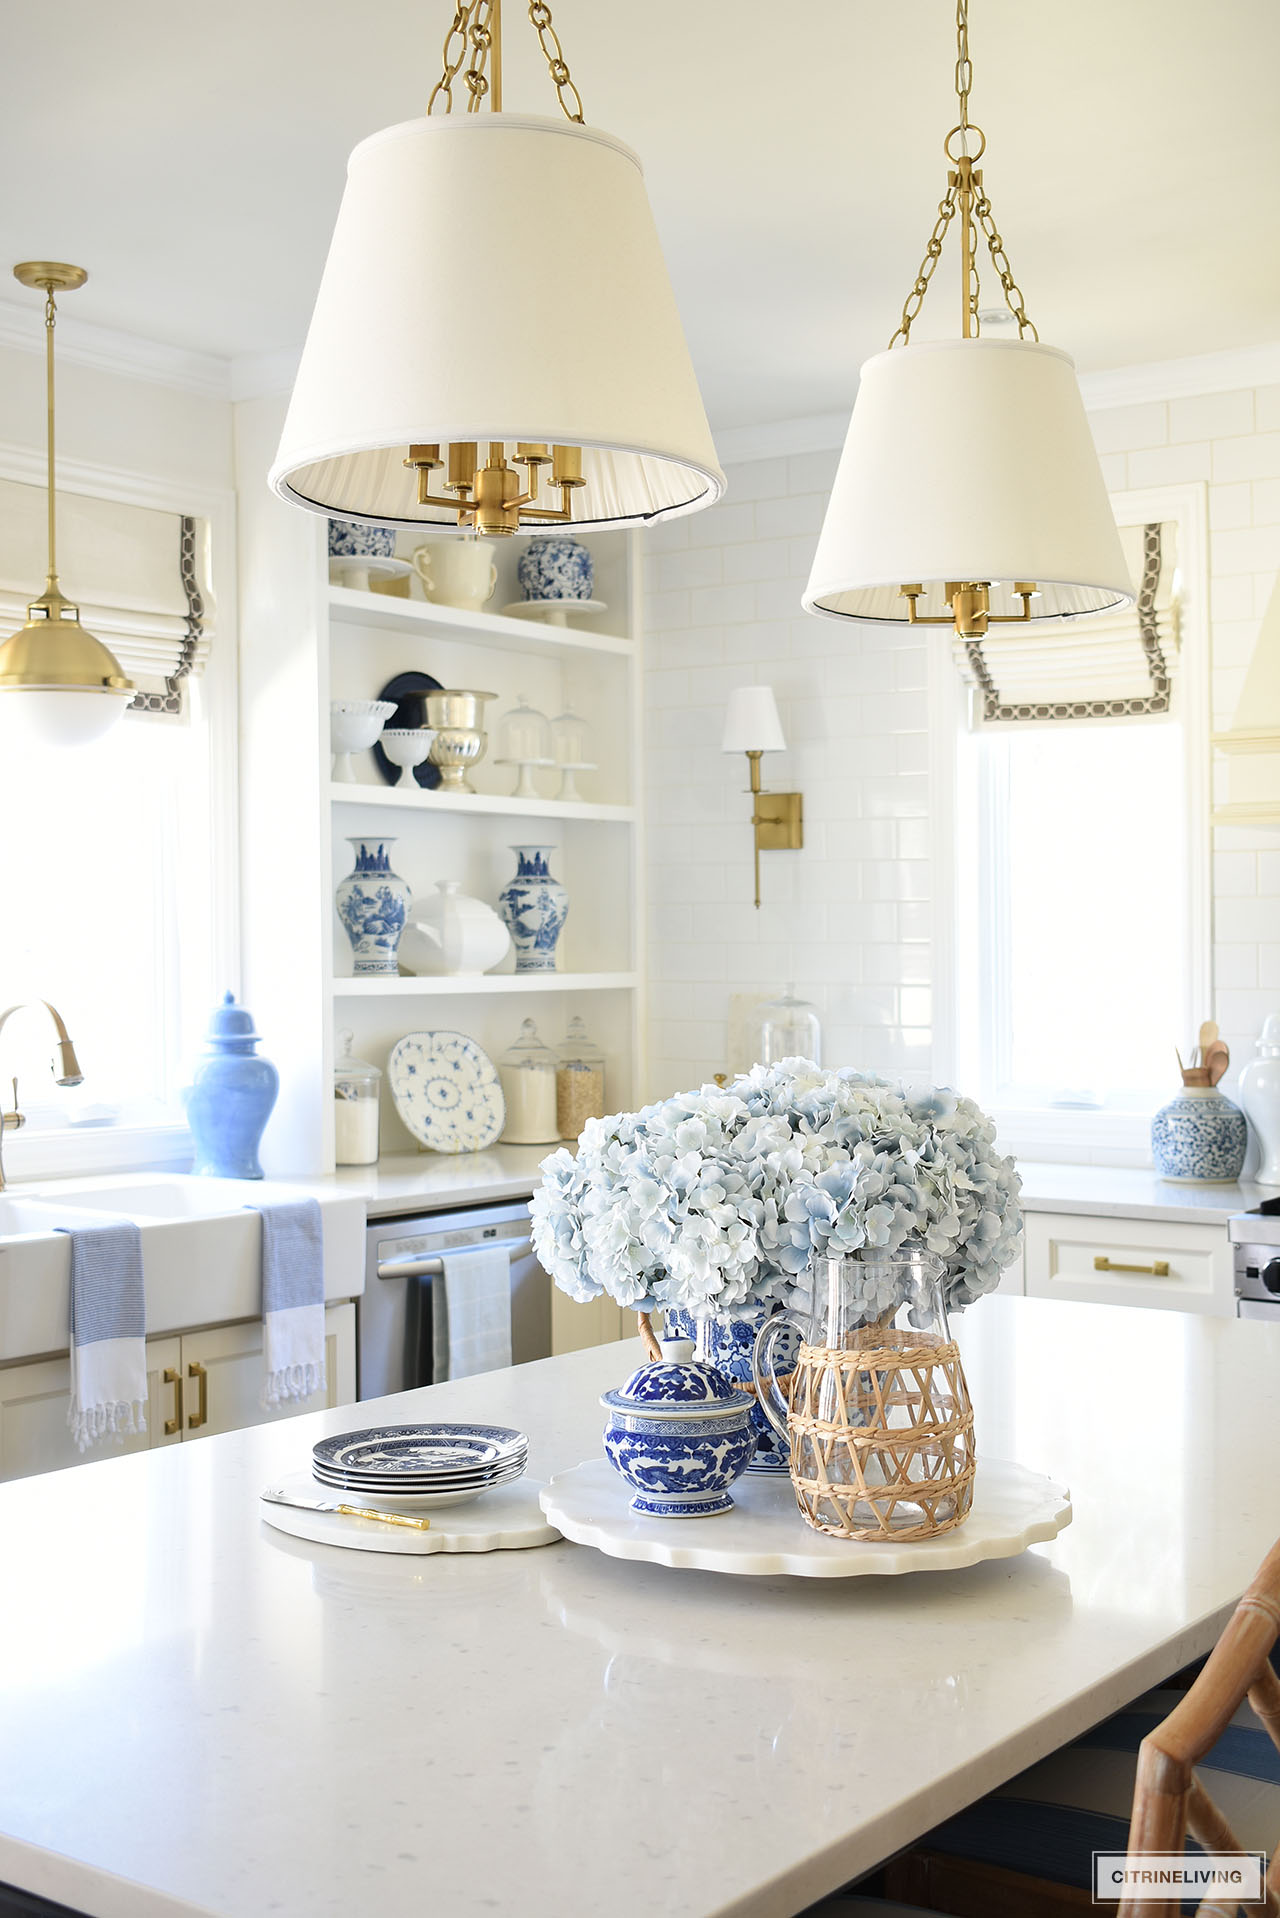 Kitchen island and open shelves styled for spring with beautiful blue and white decor.